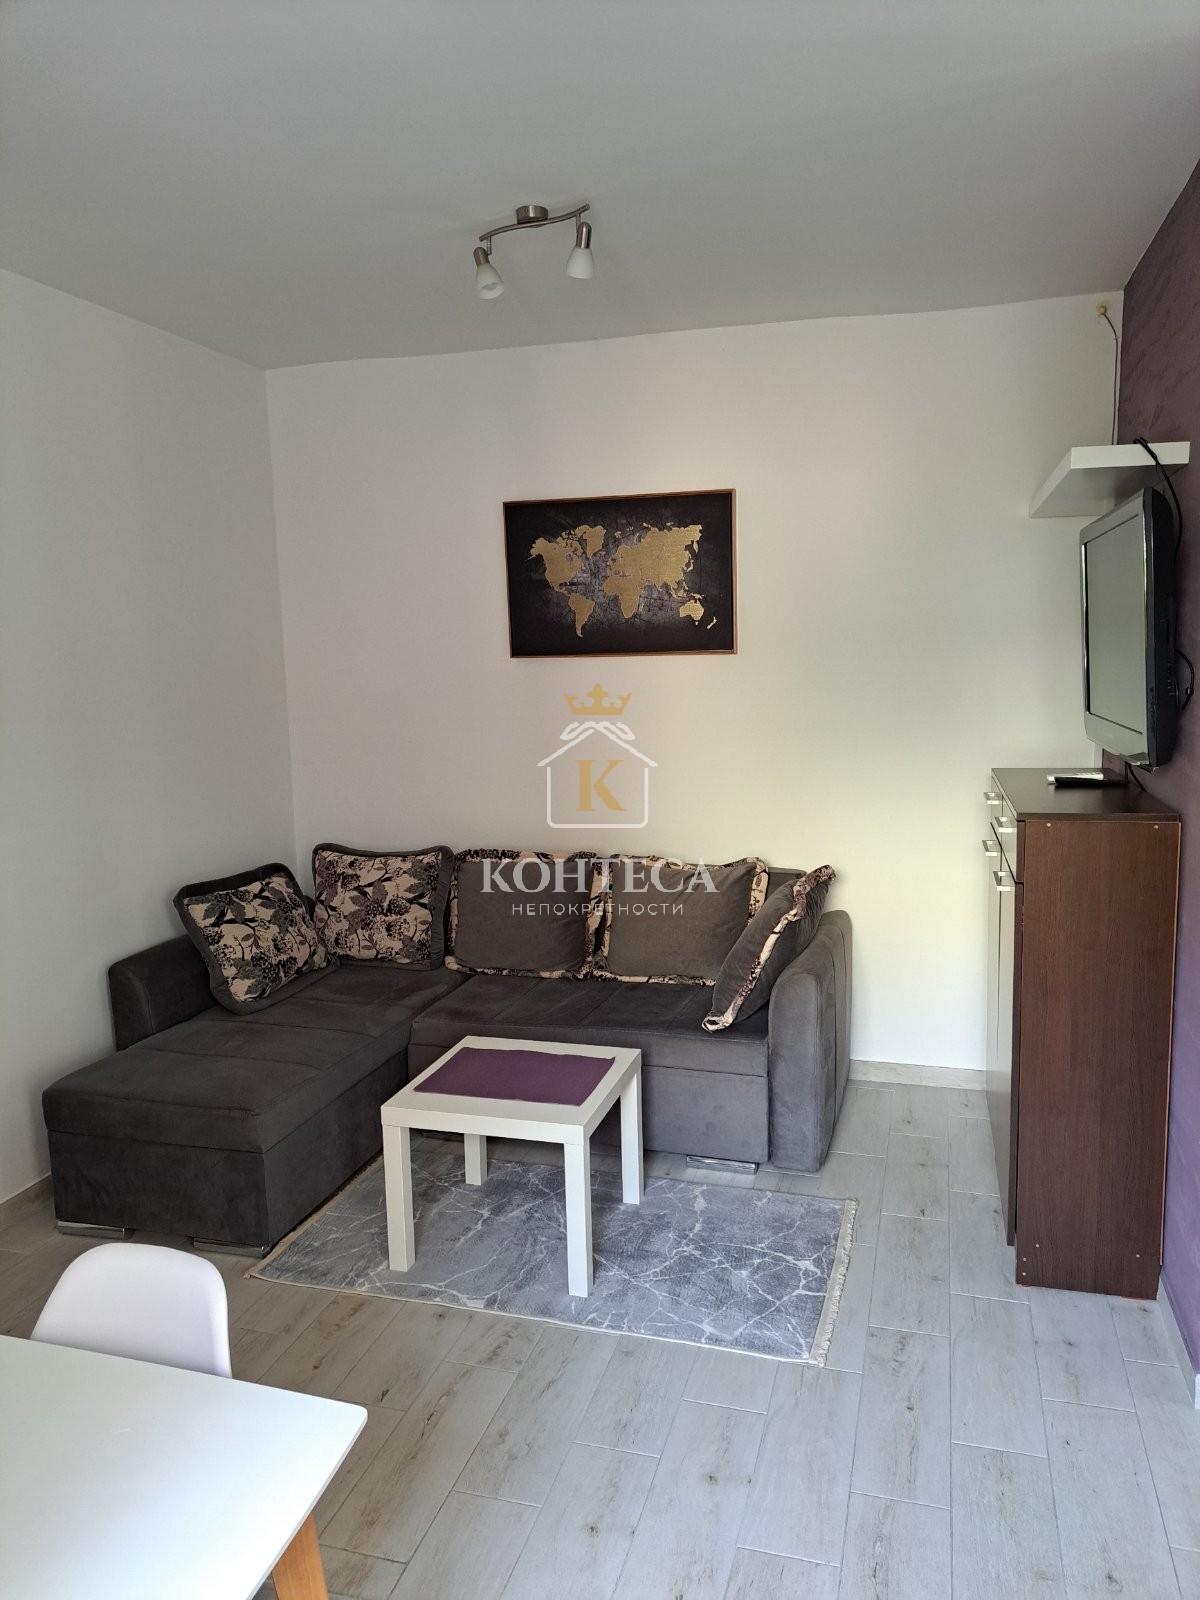 One bedroom apartment not far from the city center - Tivat